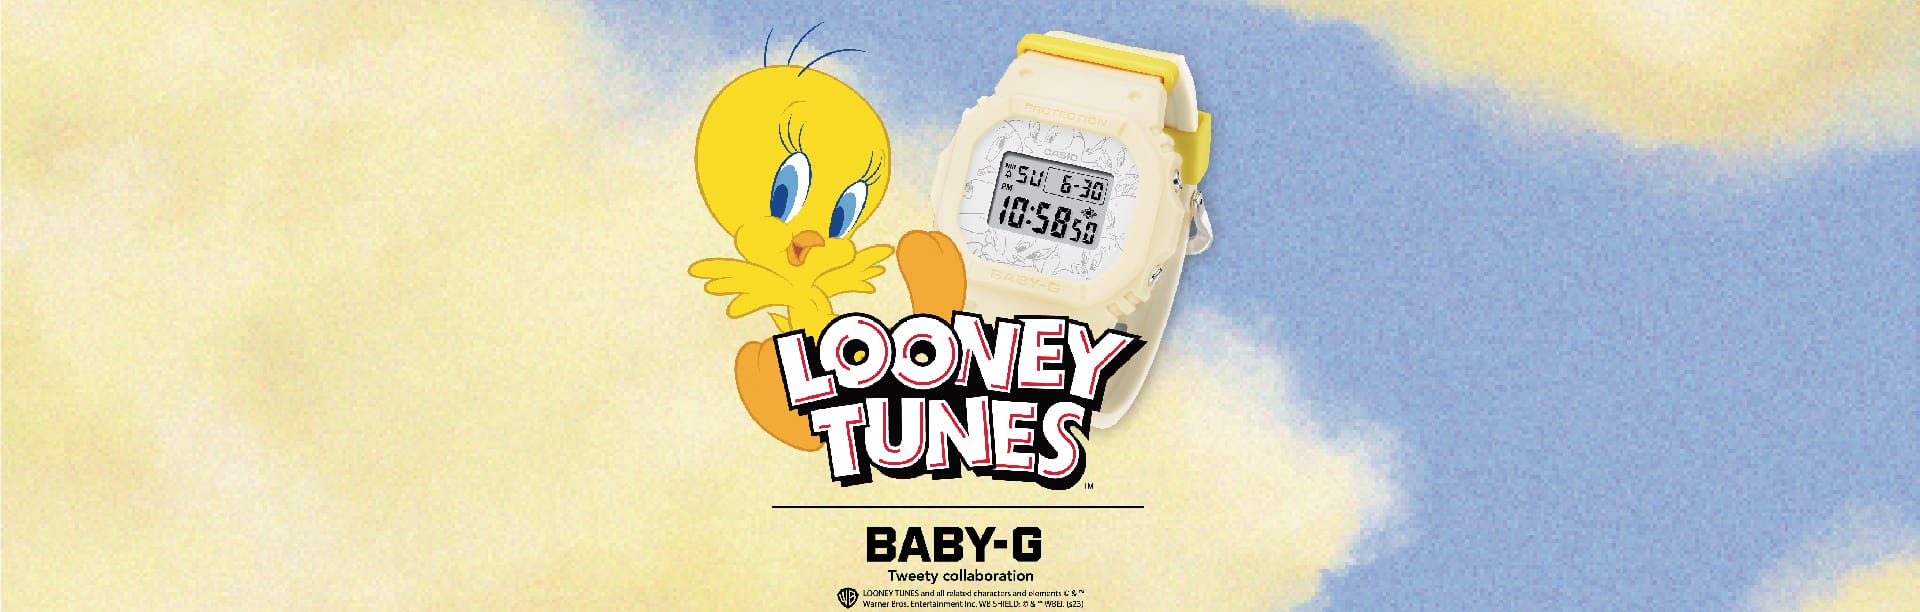 Casio BABY-G and Looney Tunes collaboration model BGD565TW-5 digital watch